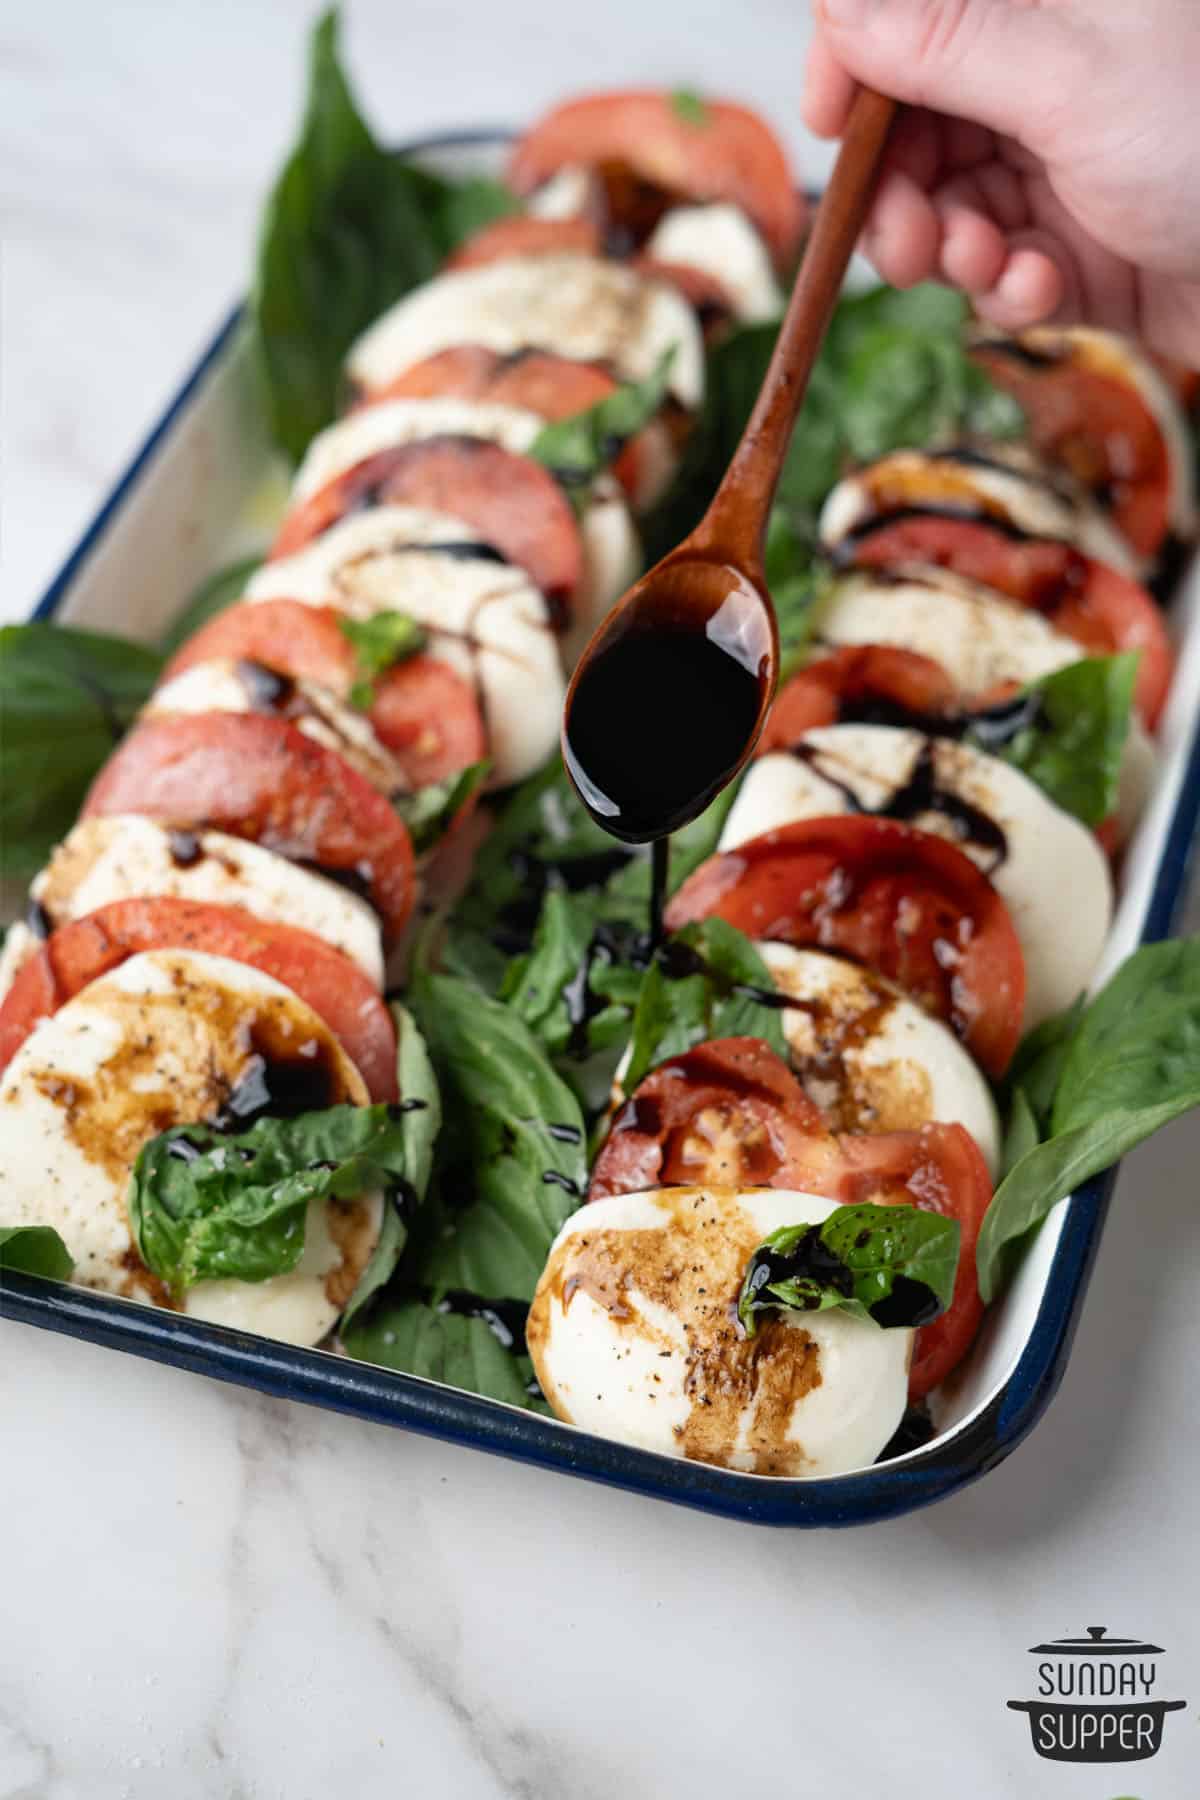 balsamic glaze being drizzled over a fresh tomato and mozzarella salad